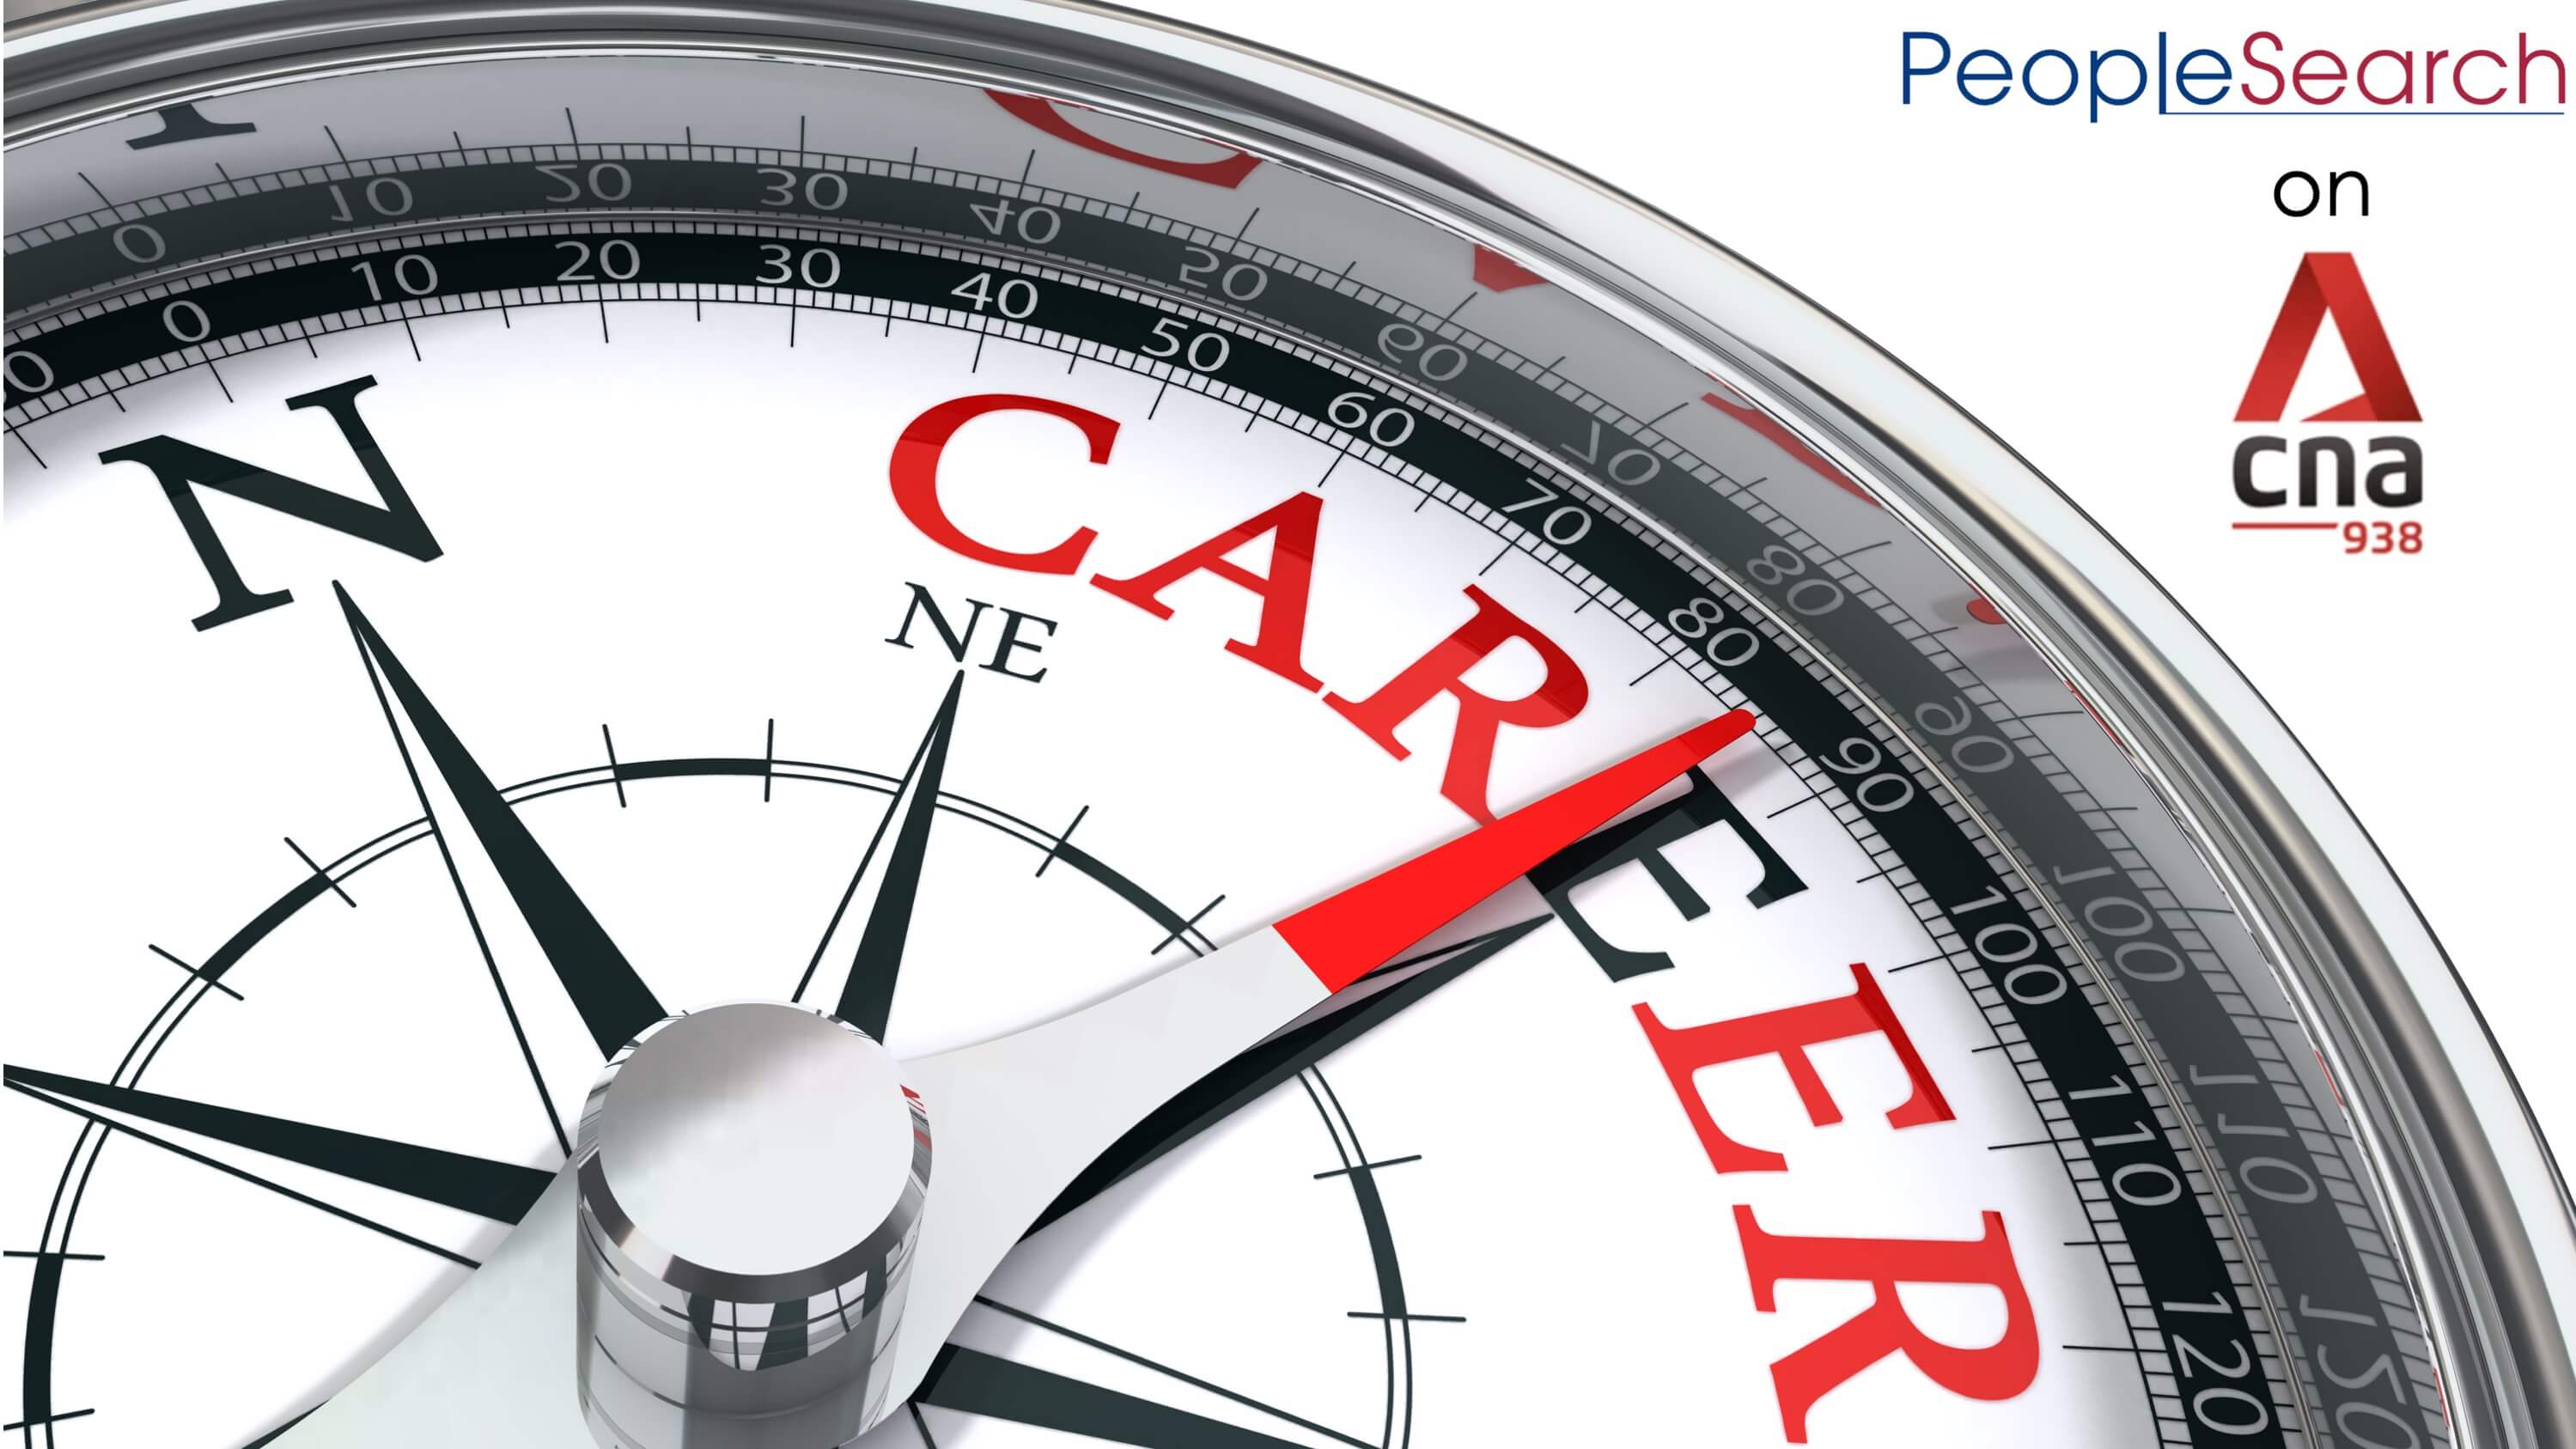 Graphic of career compass with CNA 938 and PeopleSearch logo